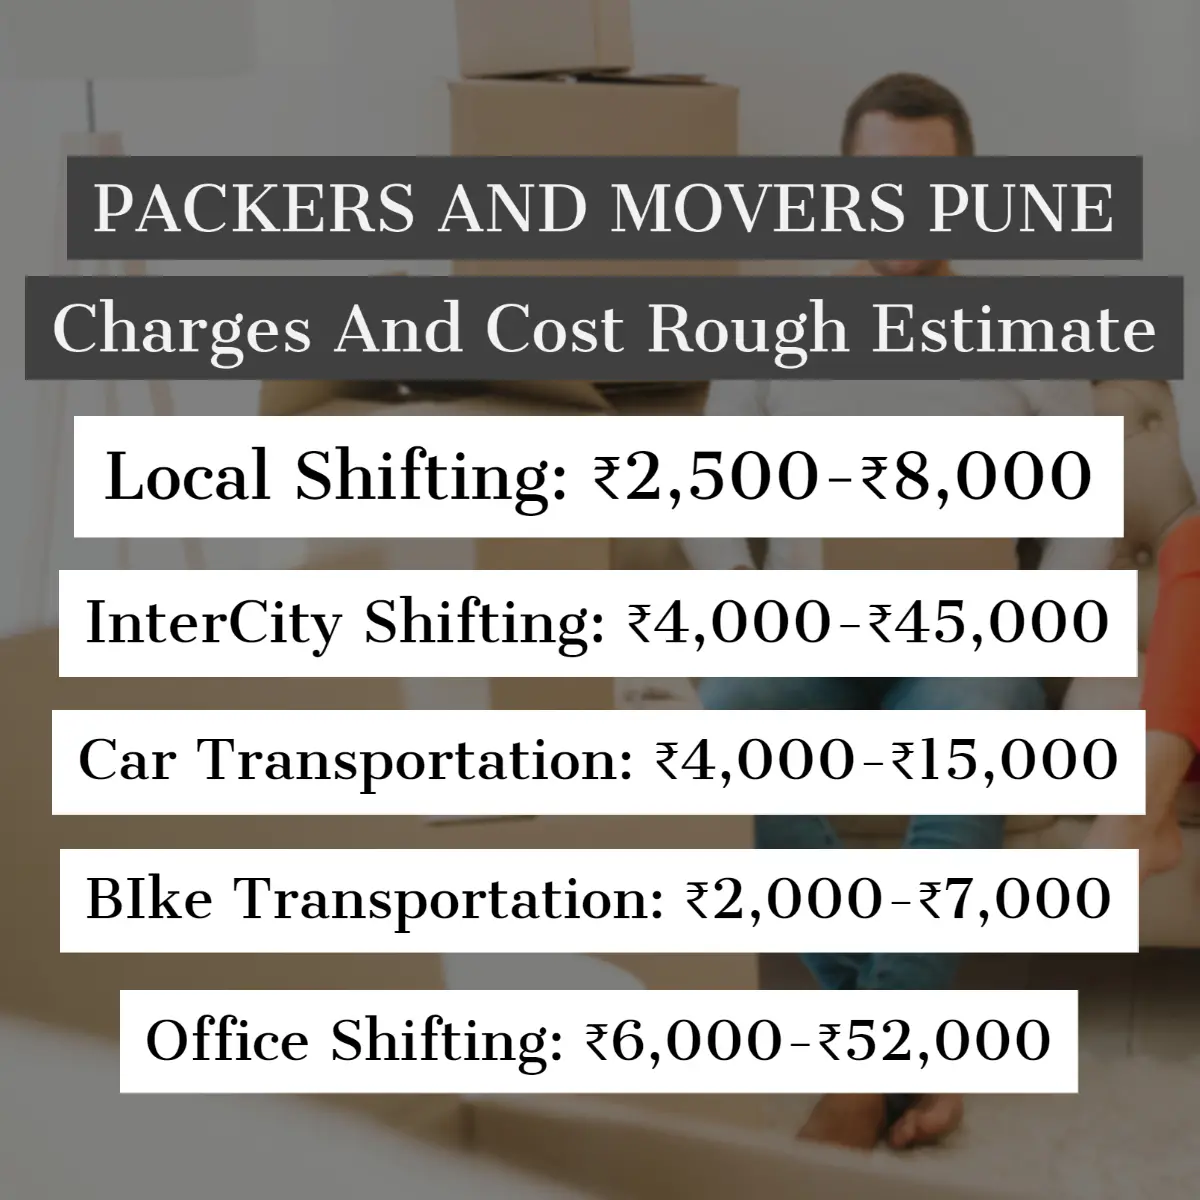 Packers and Movers Pune Charges